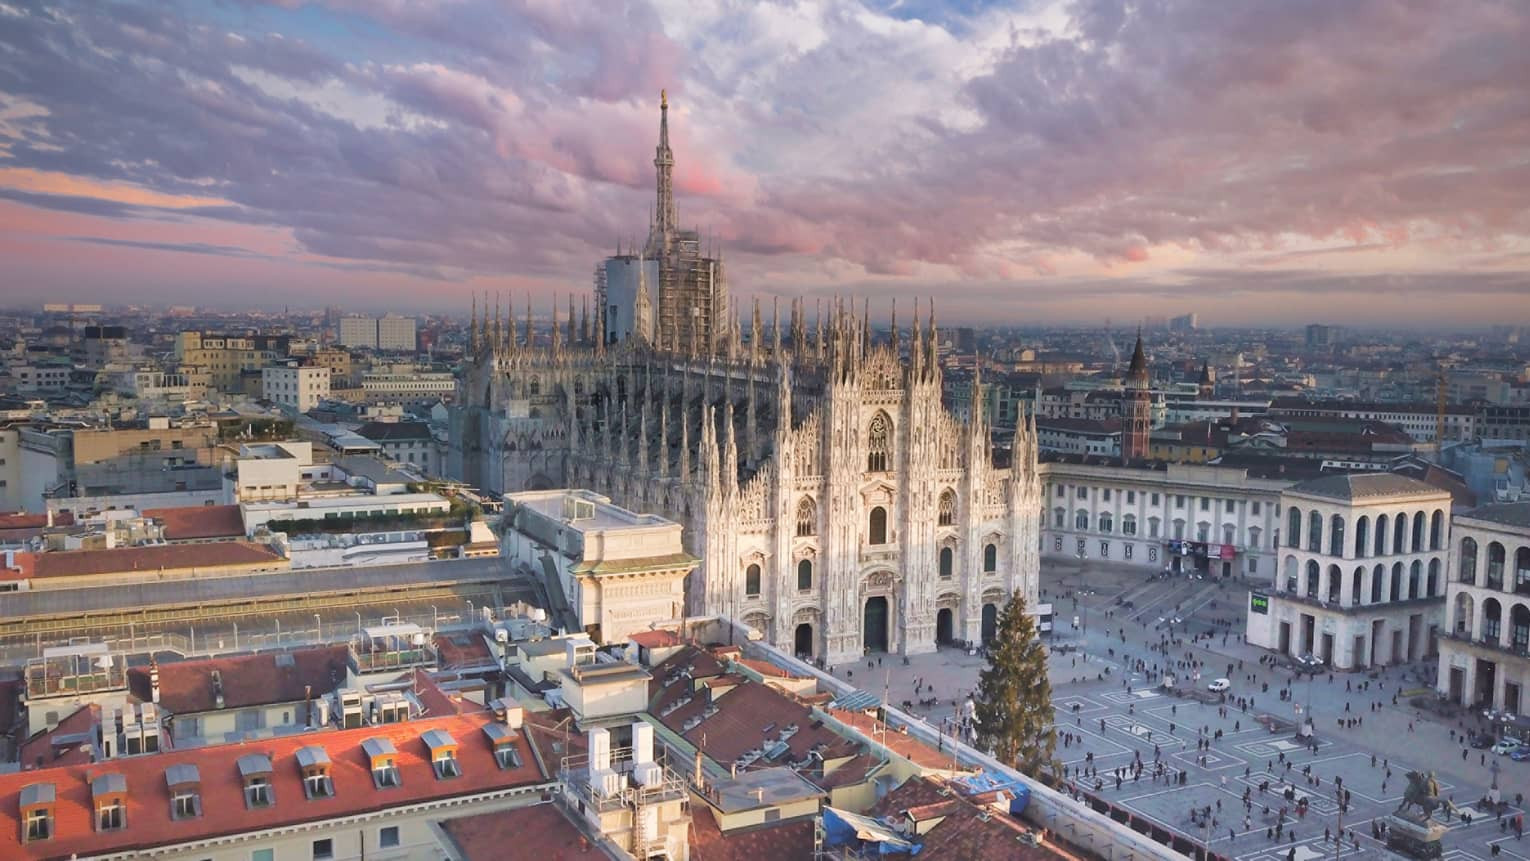 Oak View Group and Live Nation partner to deliver Milan Cortina 2026 ice hockey venue